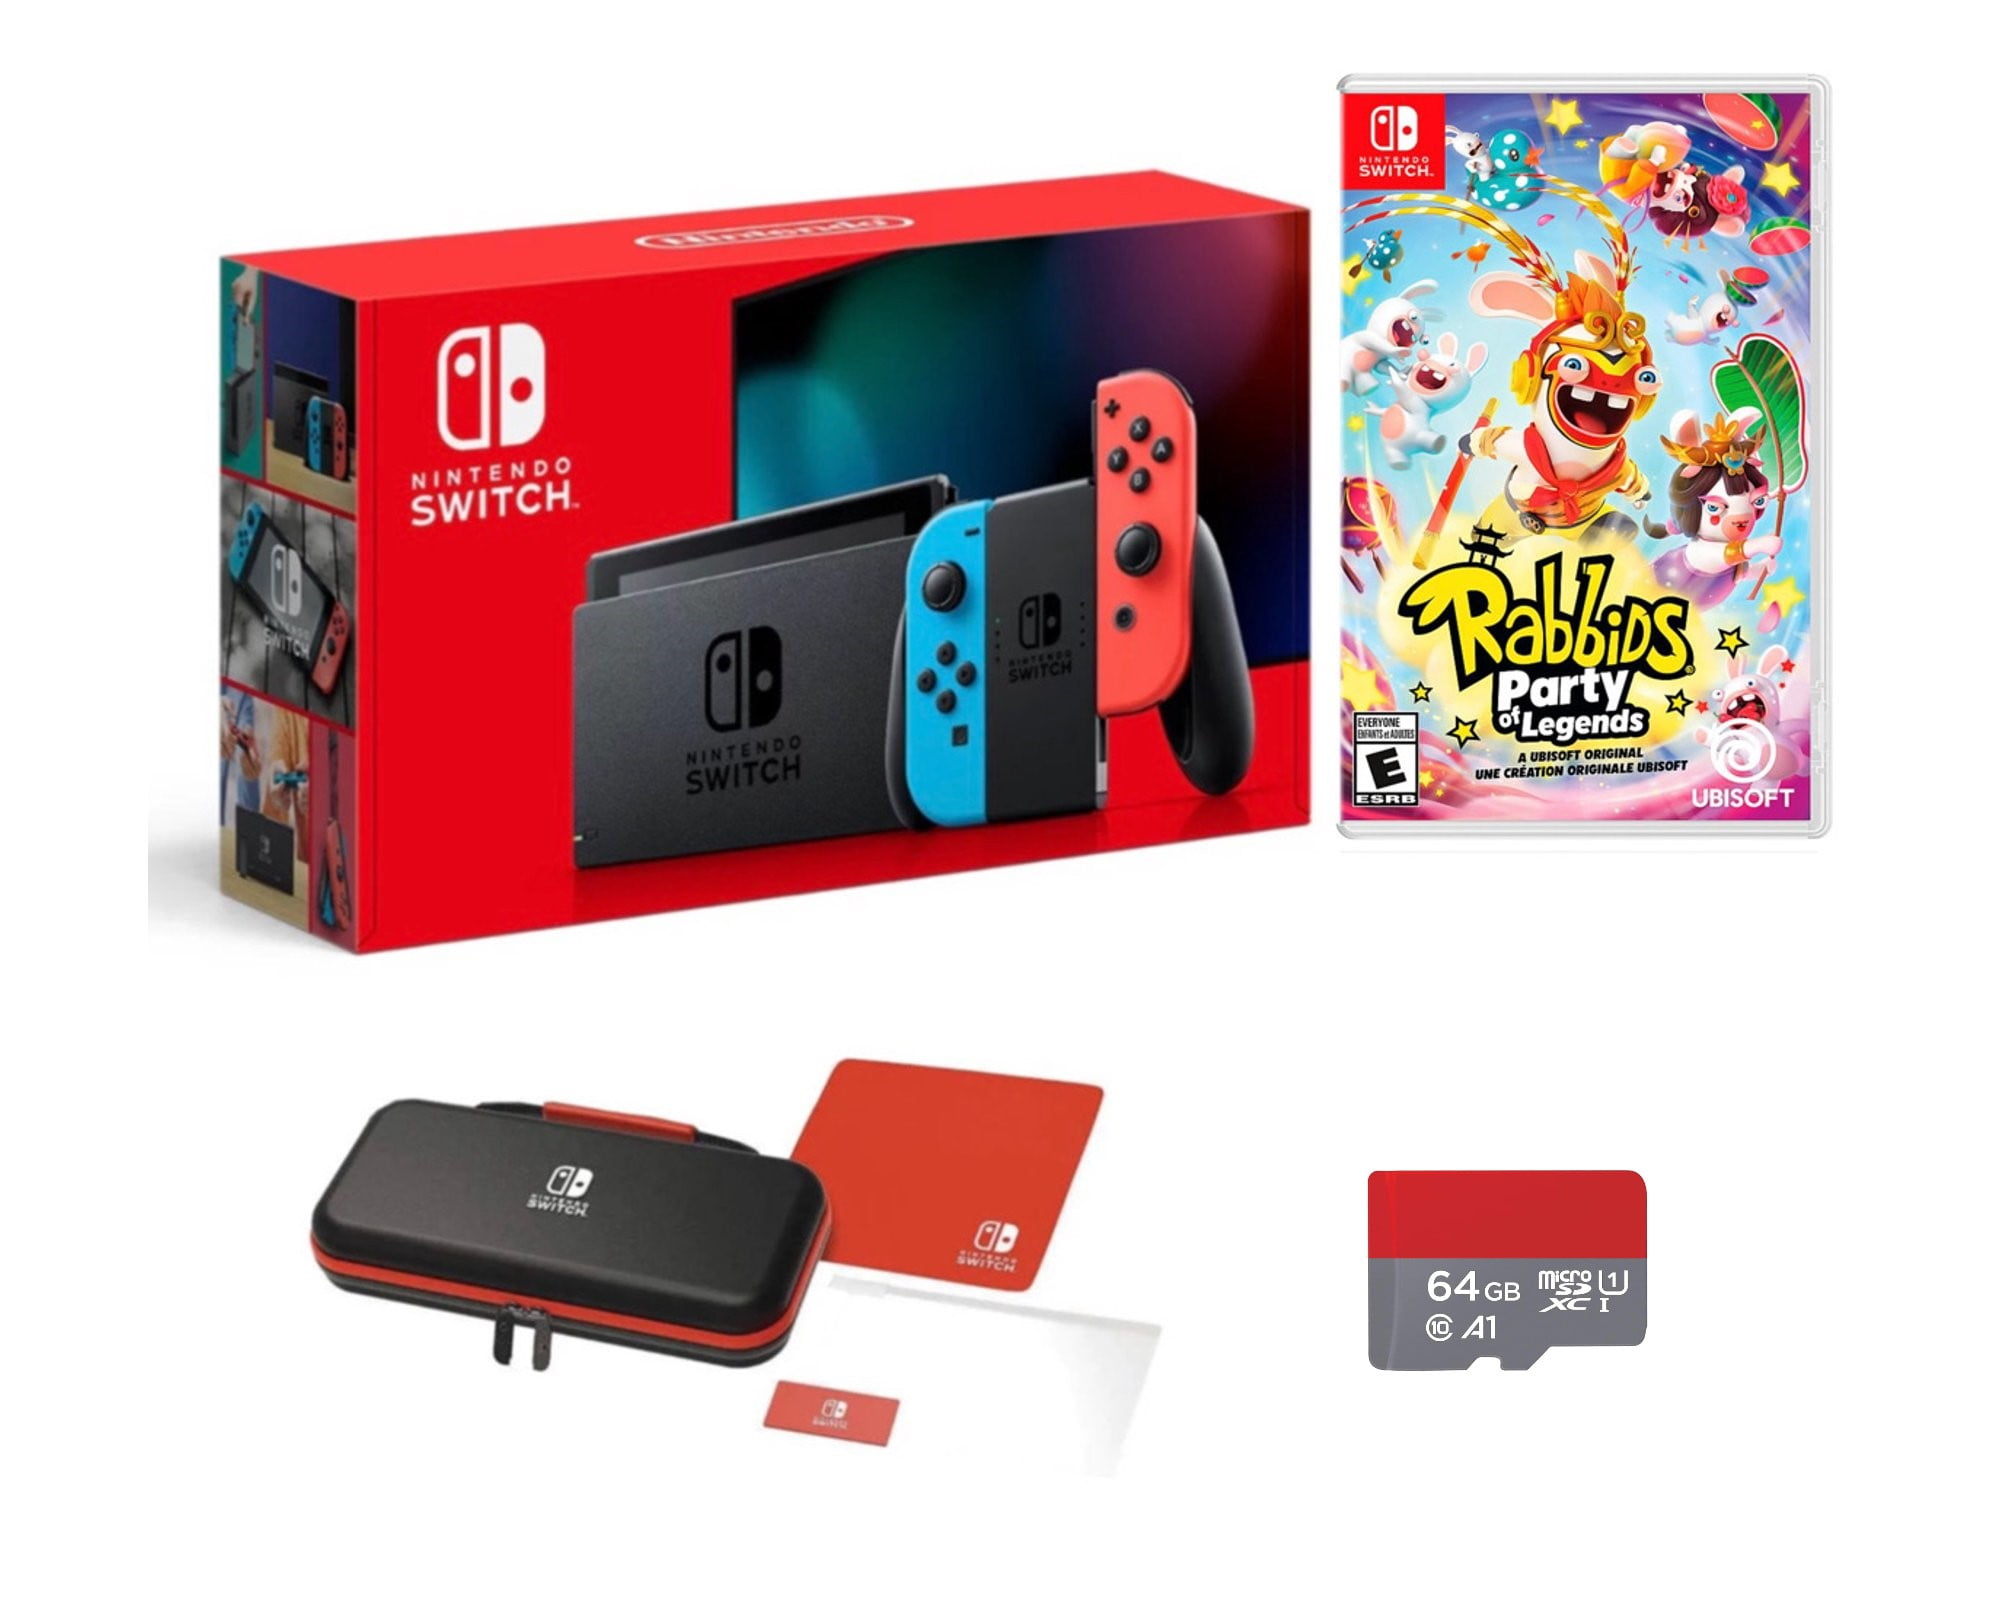 New Nintendo Switch Console with Neon Blue & Red Joy-Con - Bundle with Rabbids  Party of Legends - 64GB Micro SD Included- PowerA Case | Nintendo-Switch-Spiele